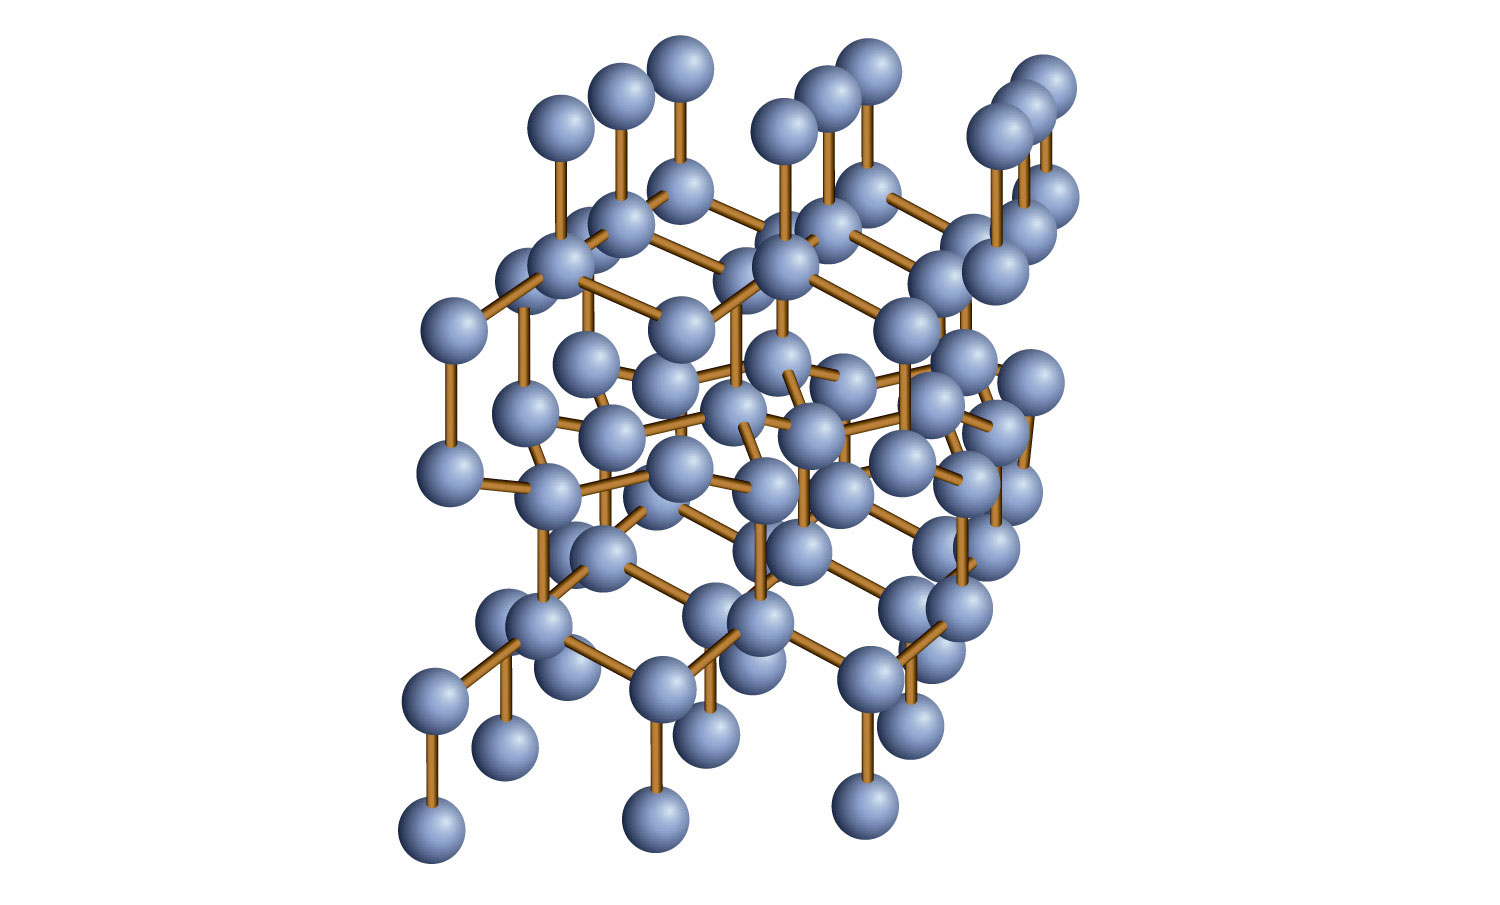 The diamond bond structure of carbons is shown.